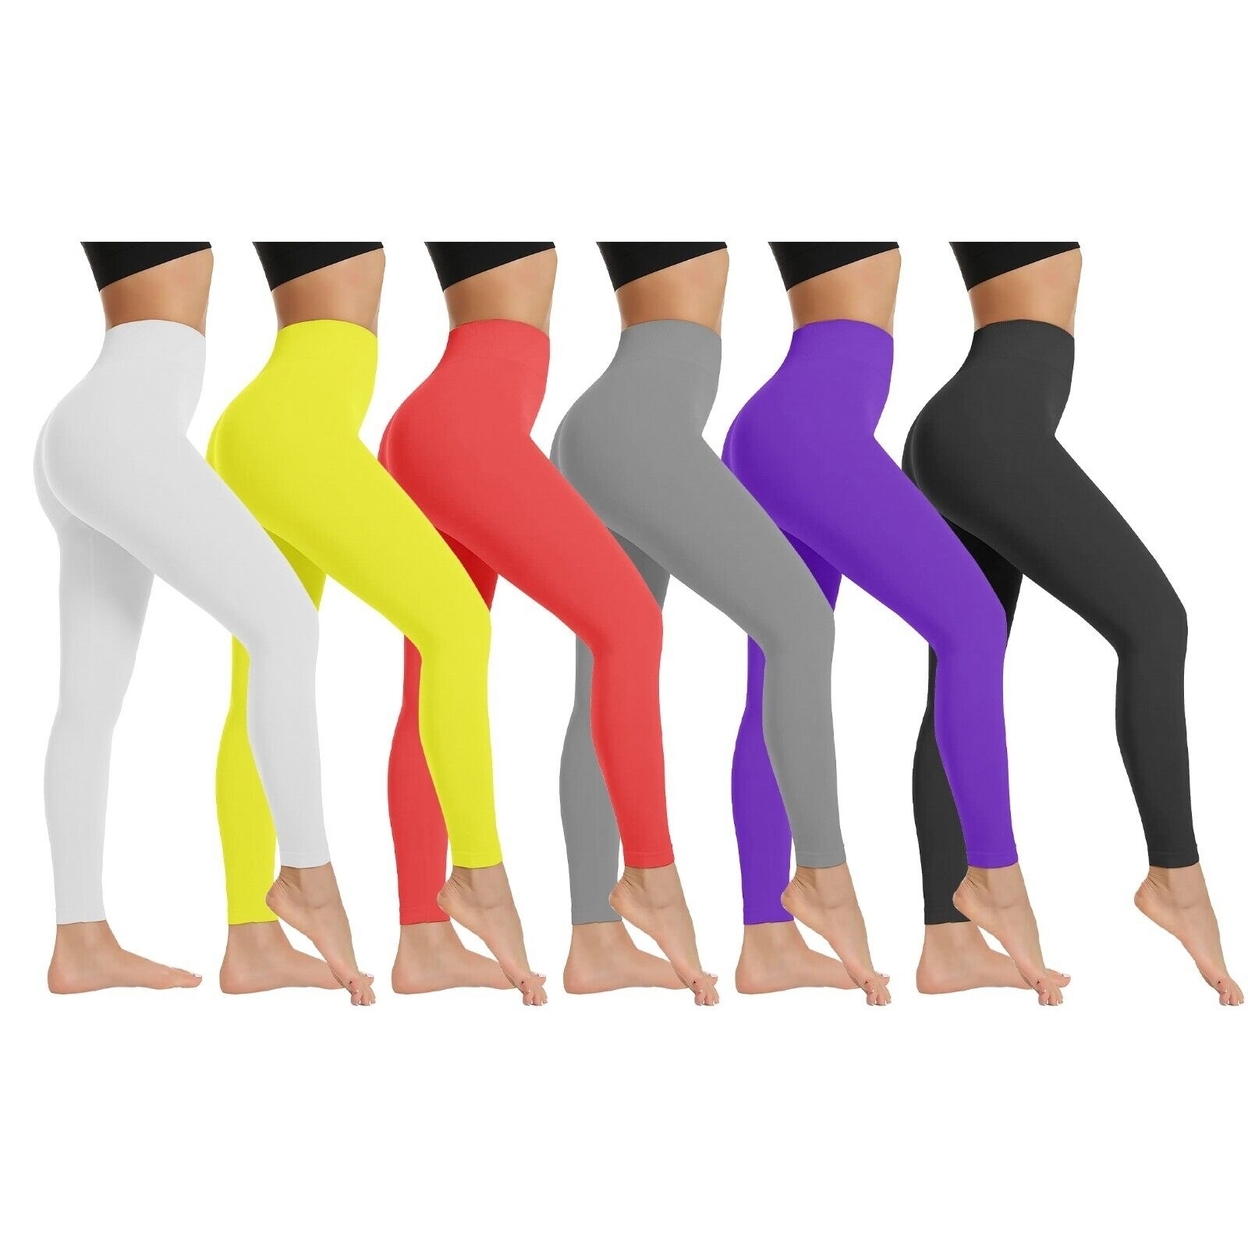 2-Pack: Women's High Waist Super Soft Active Athlete Stretch Yoga Cozy Leggings - Blue & Yellow, X-small